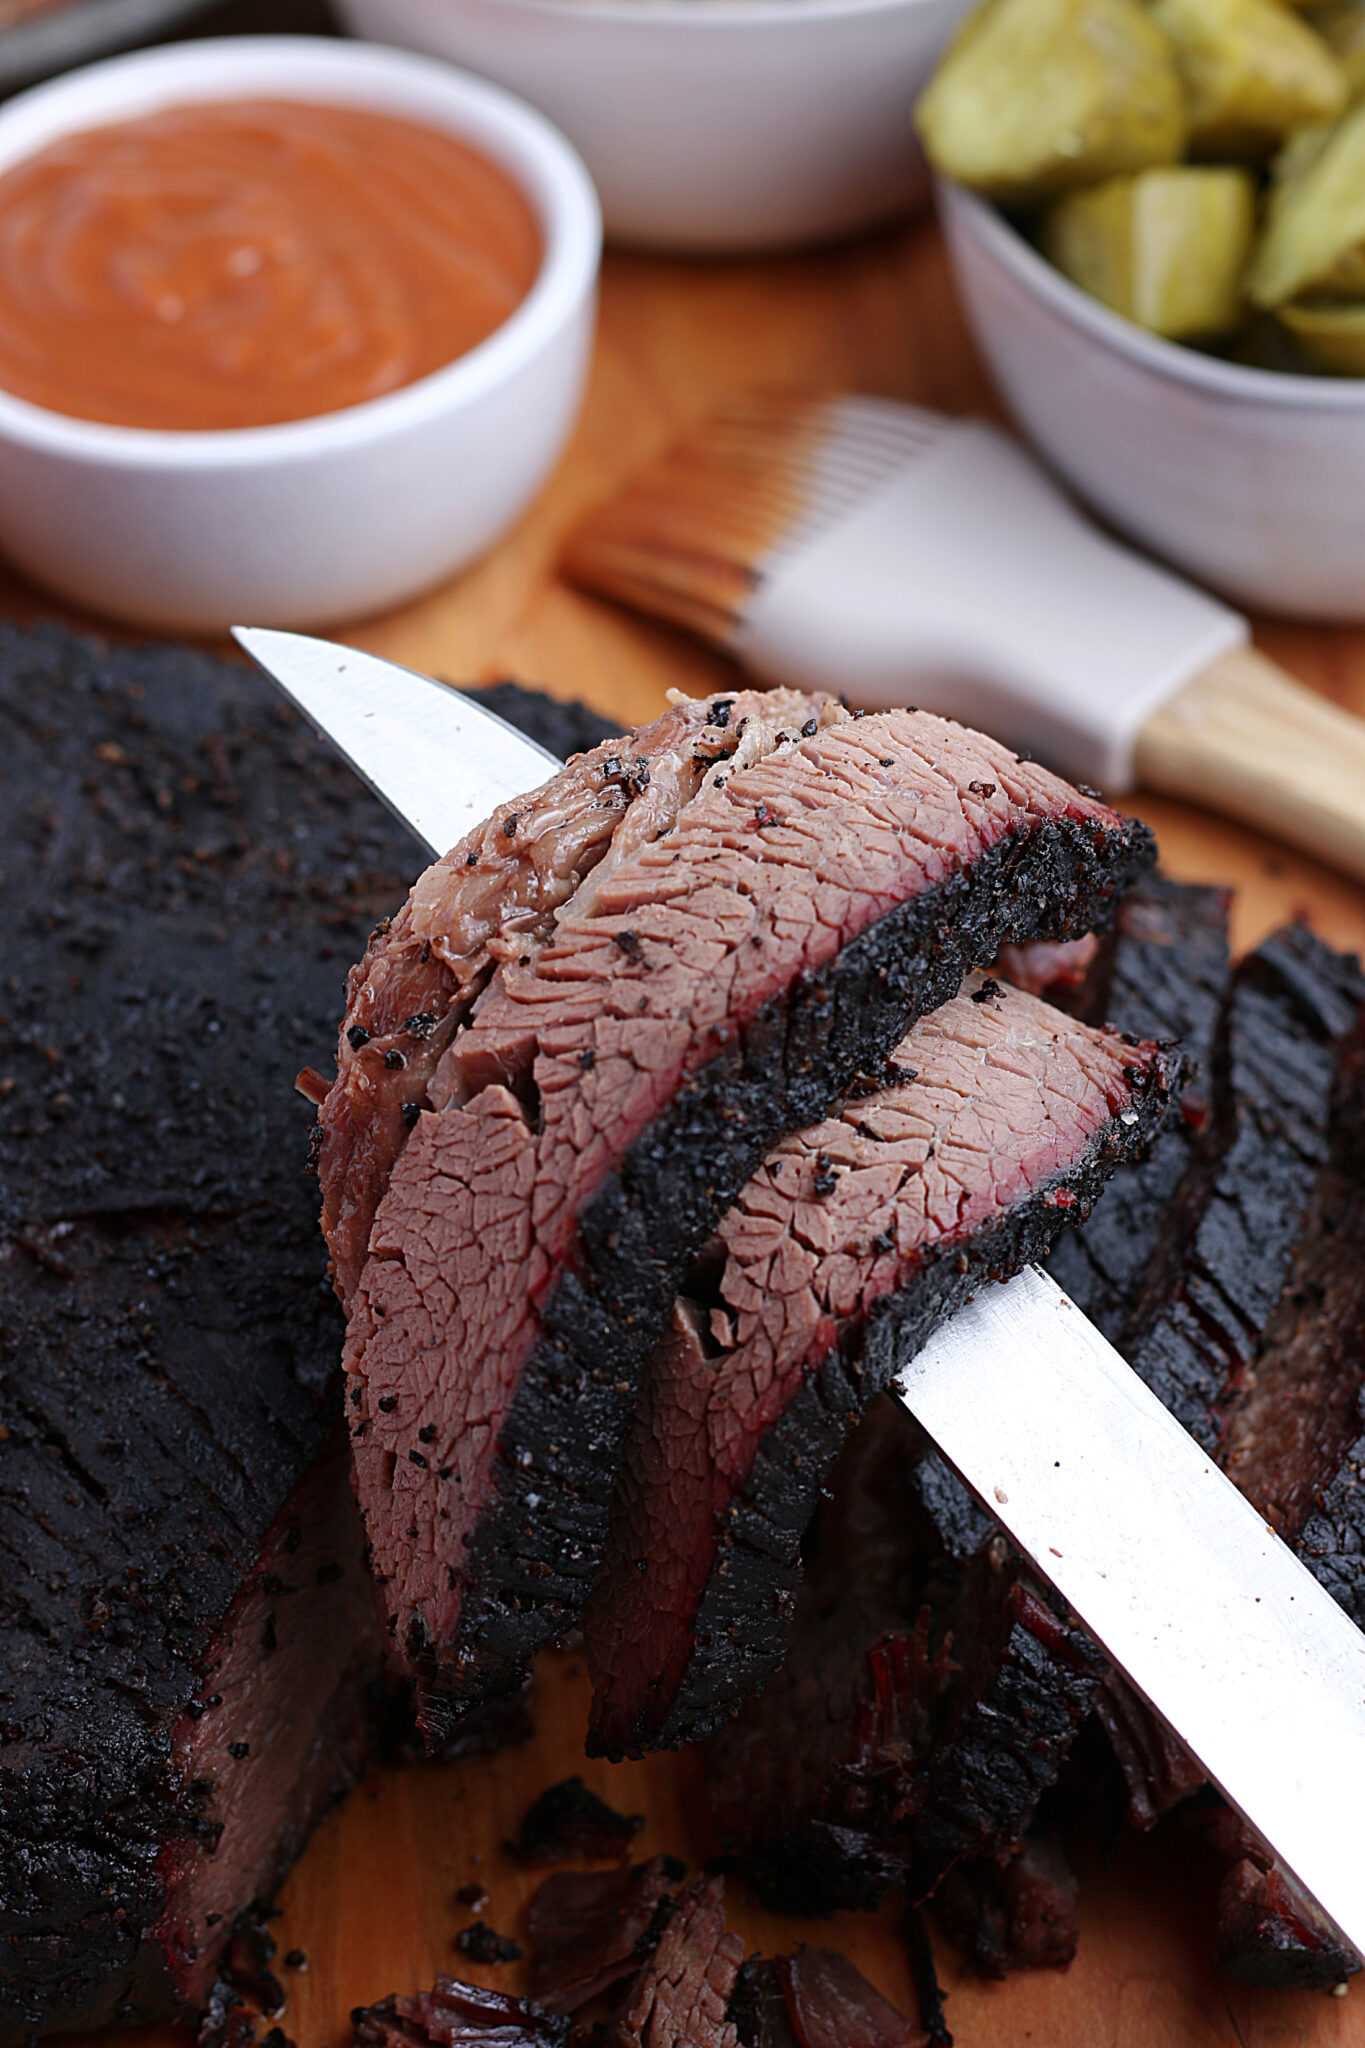 Best Wood For Smoking Meats - Brisket, Turkey, Ribs, Chicken and more